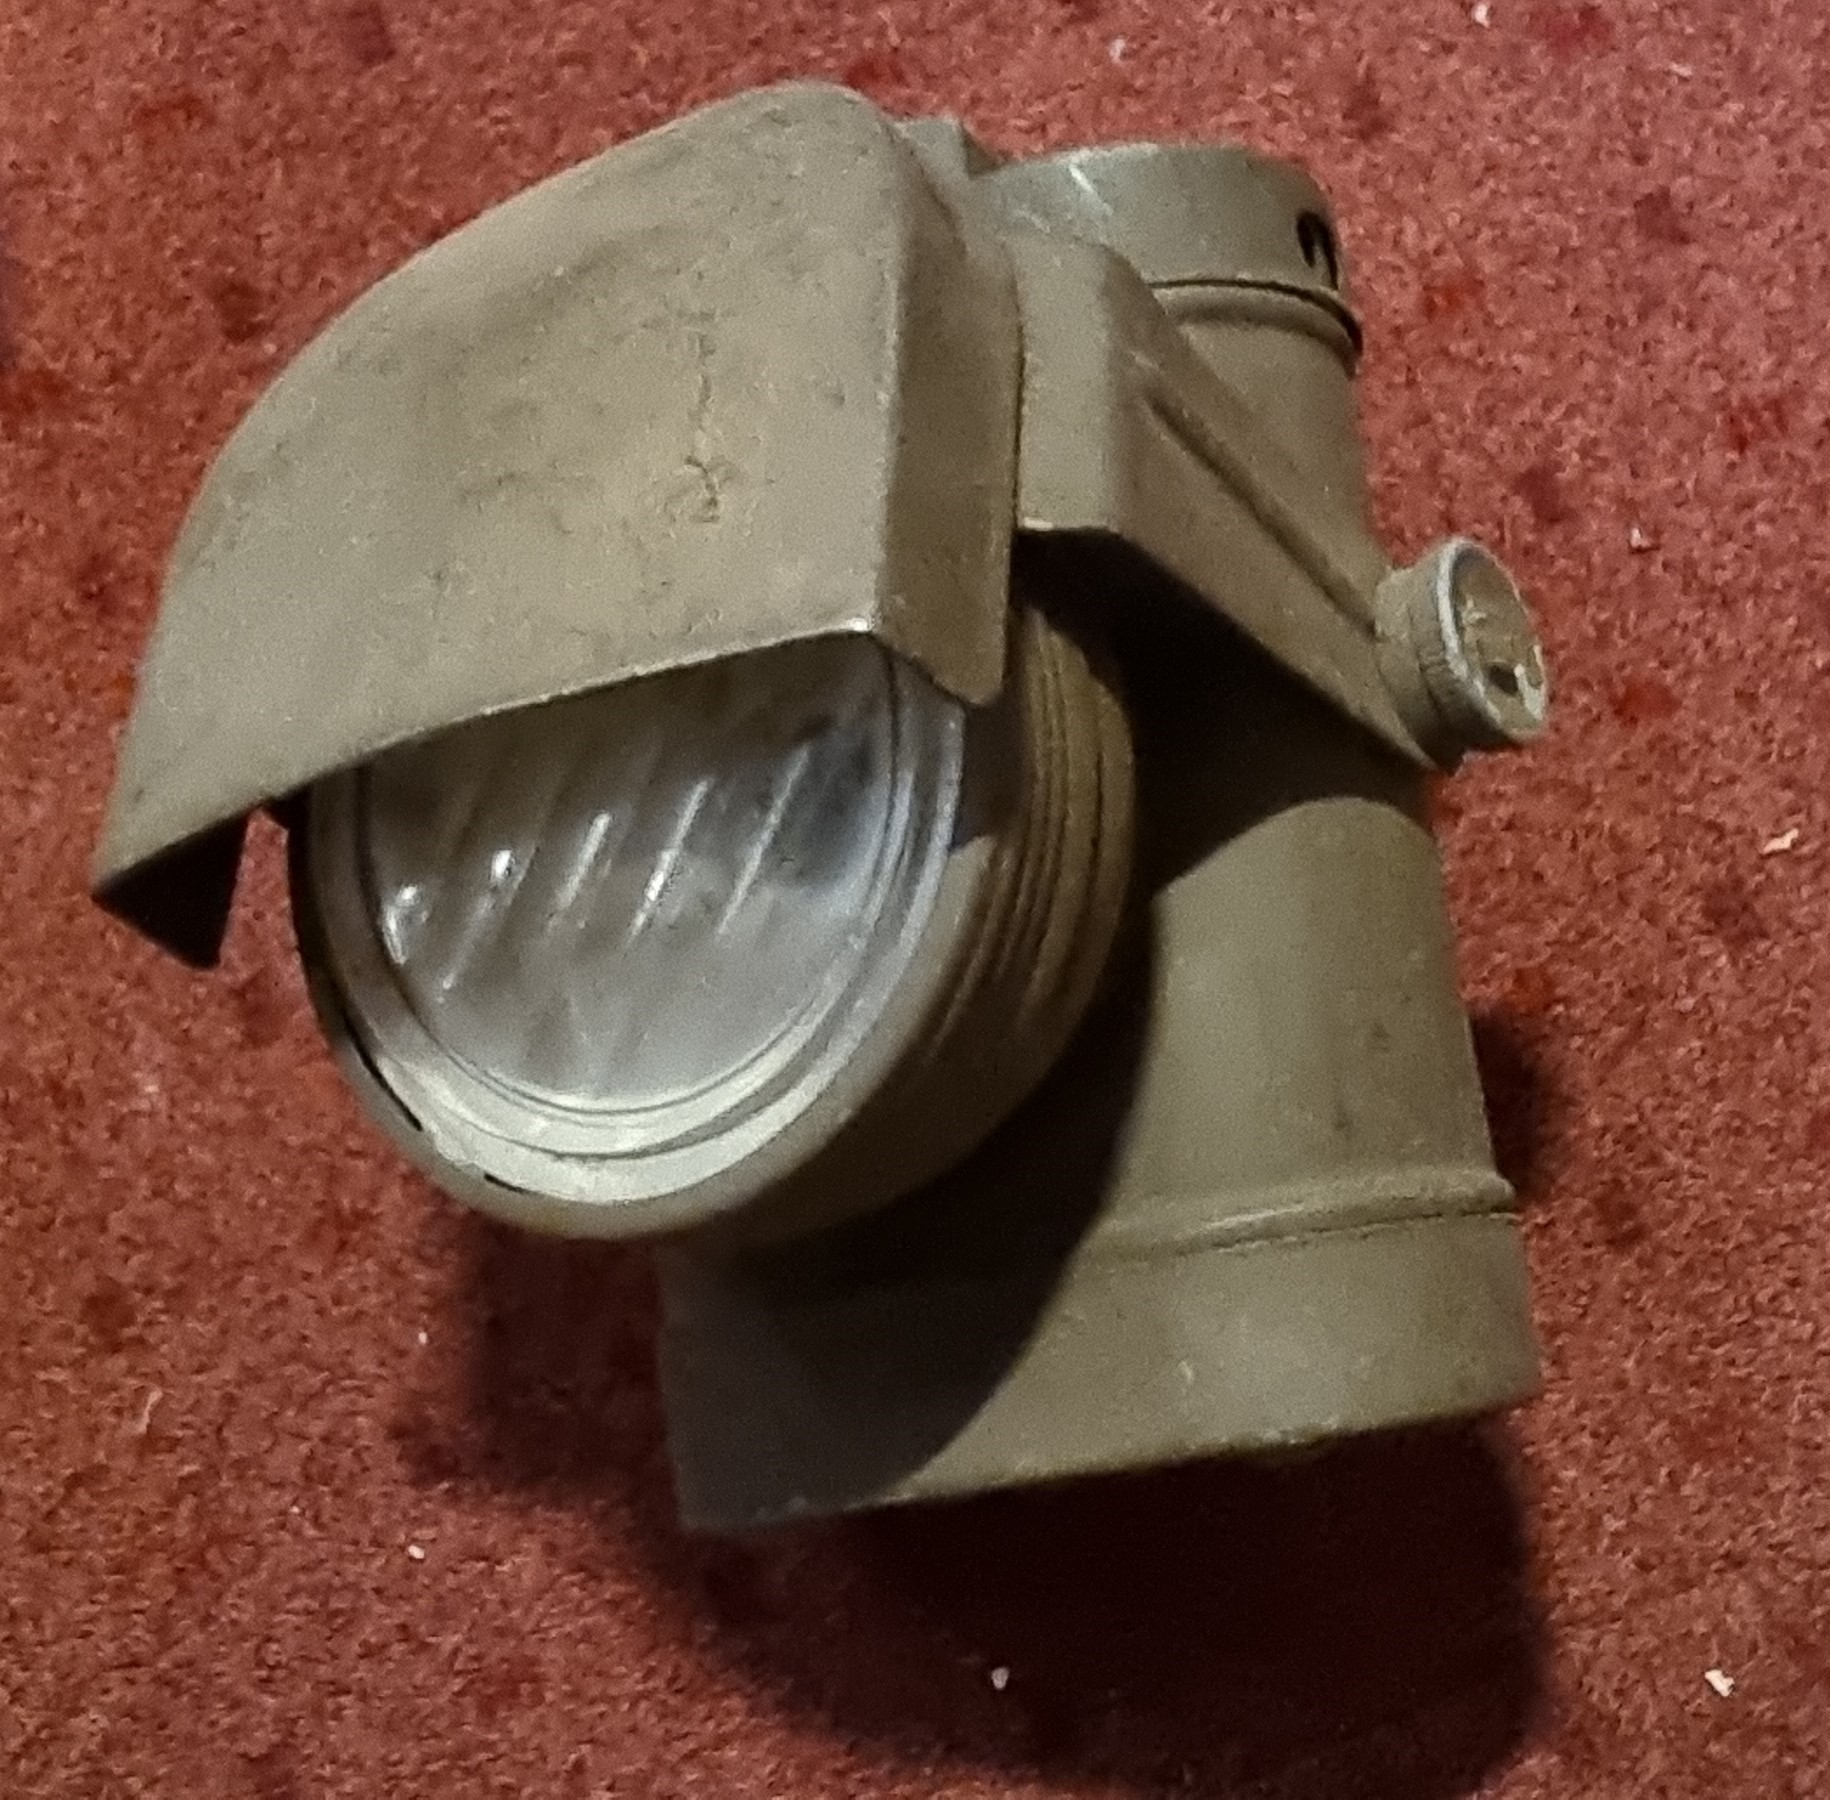 A WD J.L. Ltd Lamps Electric bicycle lamp, with drop down lens cover, other lamps, bells, pumps - Image 2 of 2